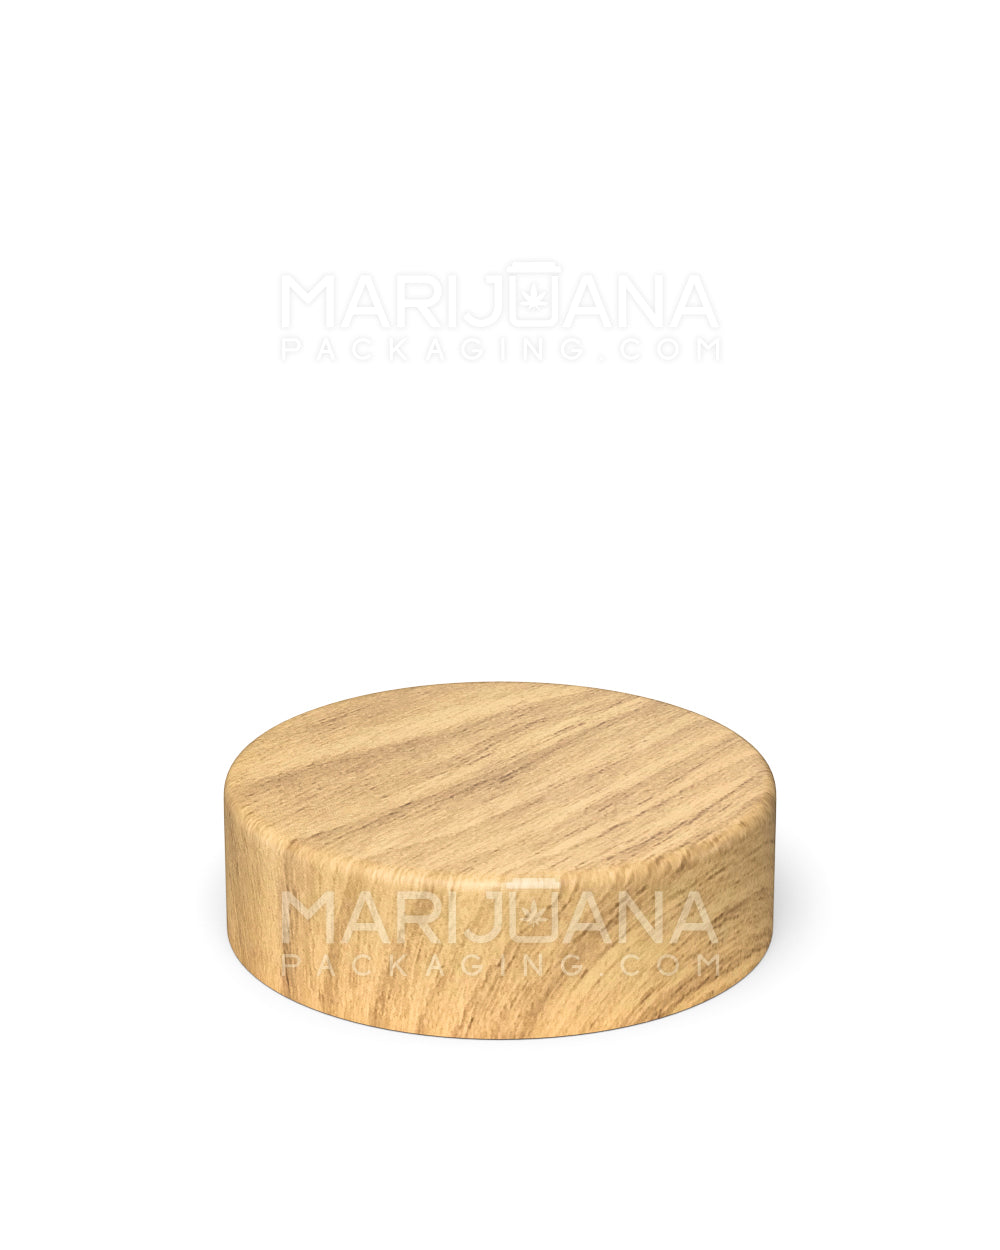 Child Resistant | Smooth Flat Push Down & Turn Plastic Caps w/ Foam Liner | 53mm - Maple Wood - 100 Count - 3